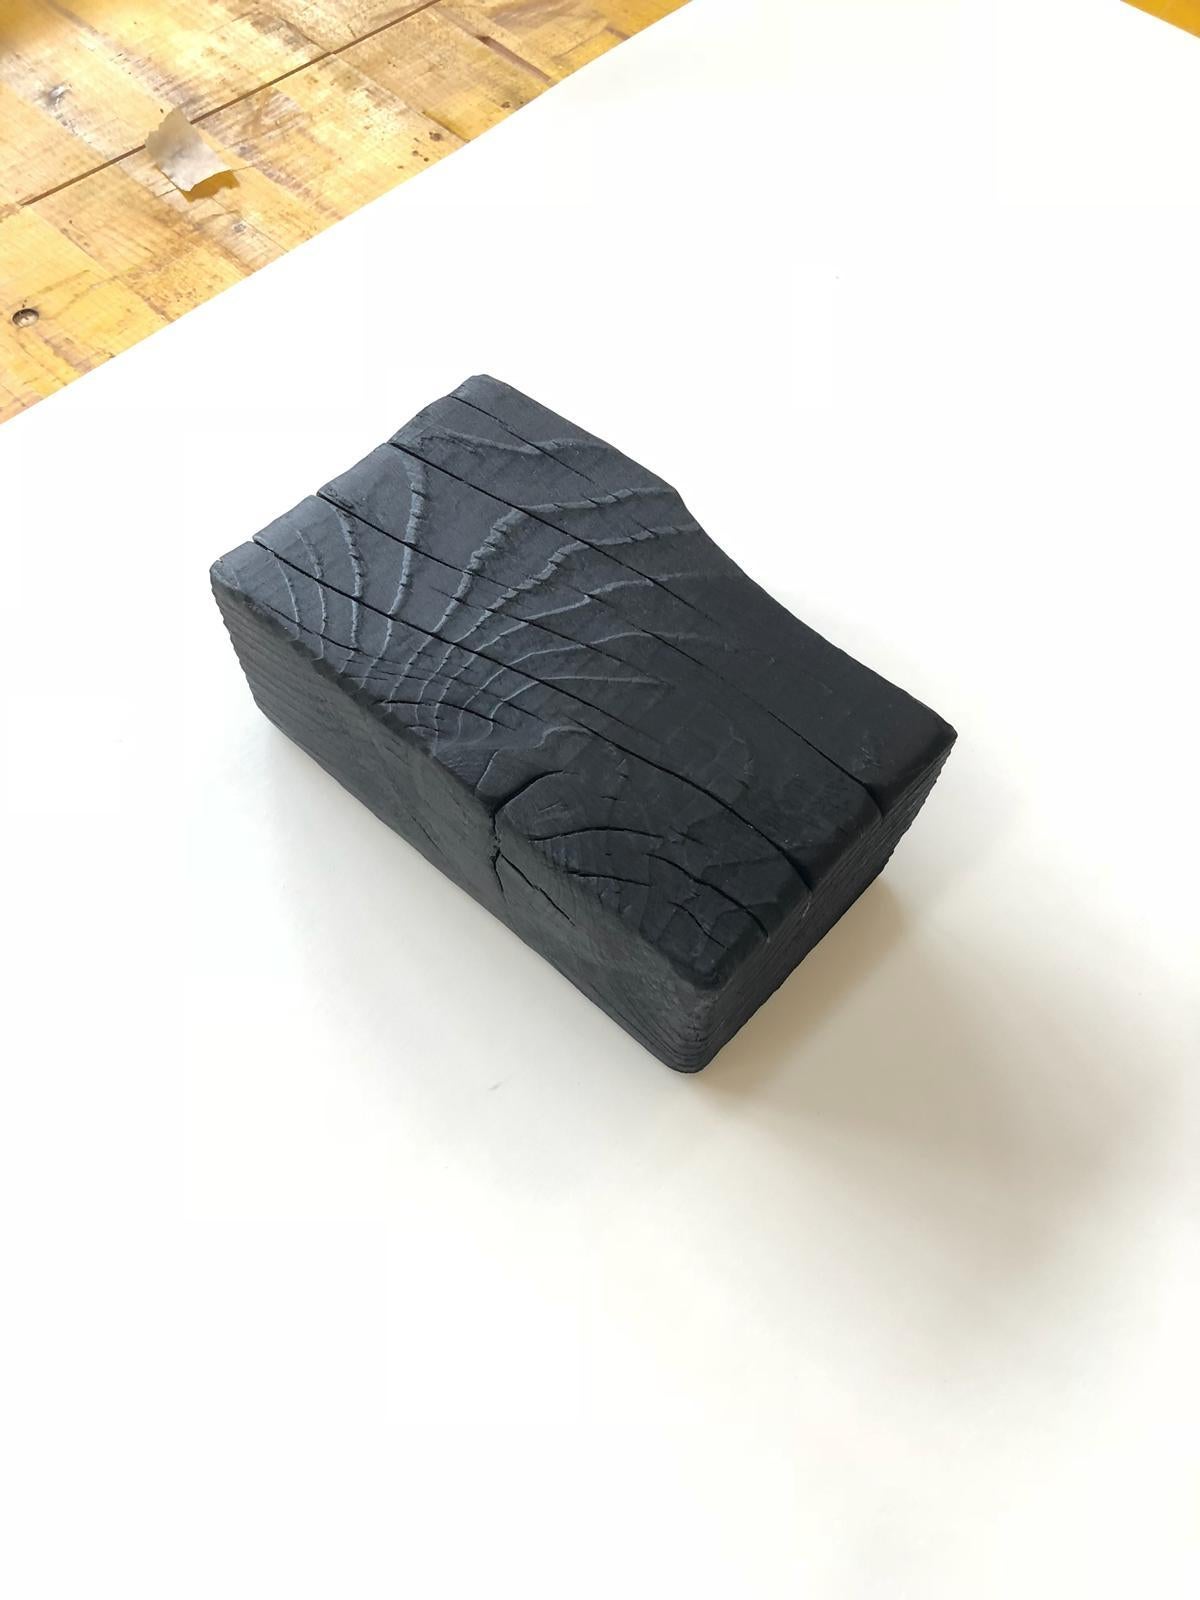 Contemporary Limited Edition Signed Charred Stool, Mhono V1 by Edizione Limitata For Sale 2